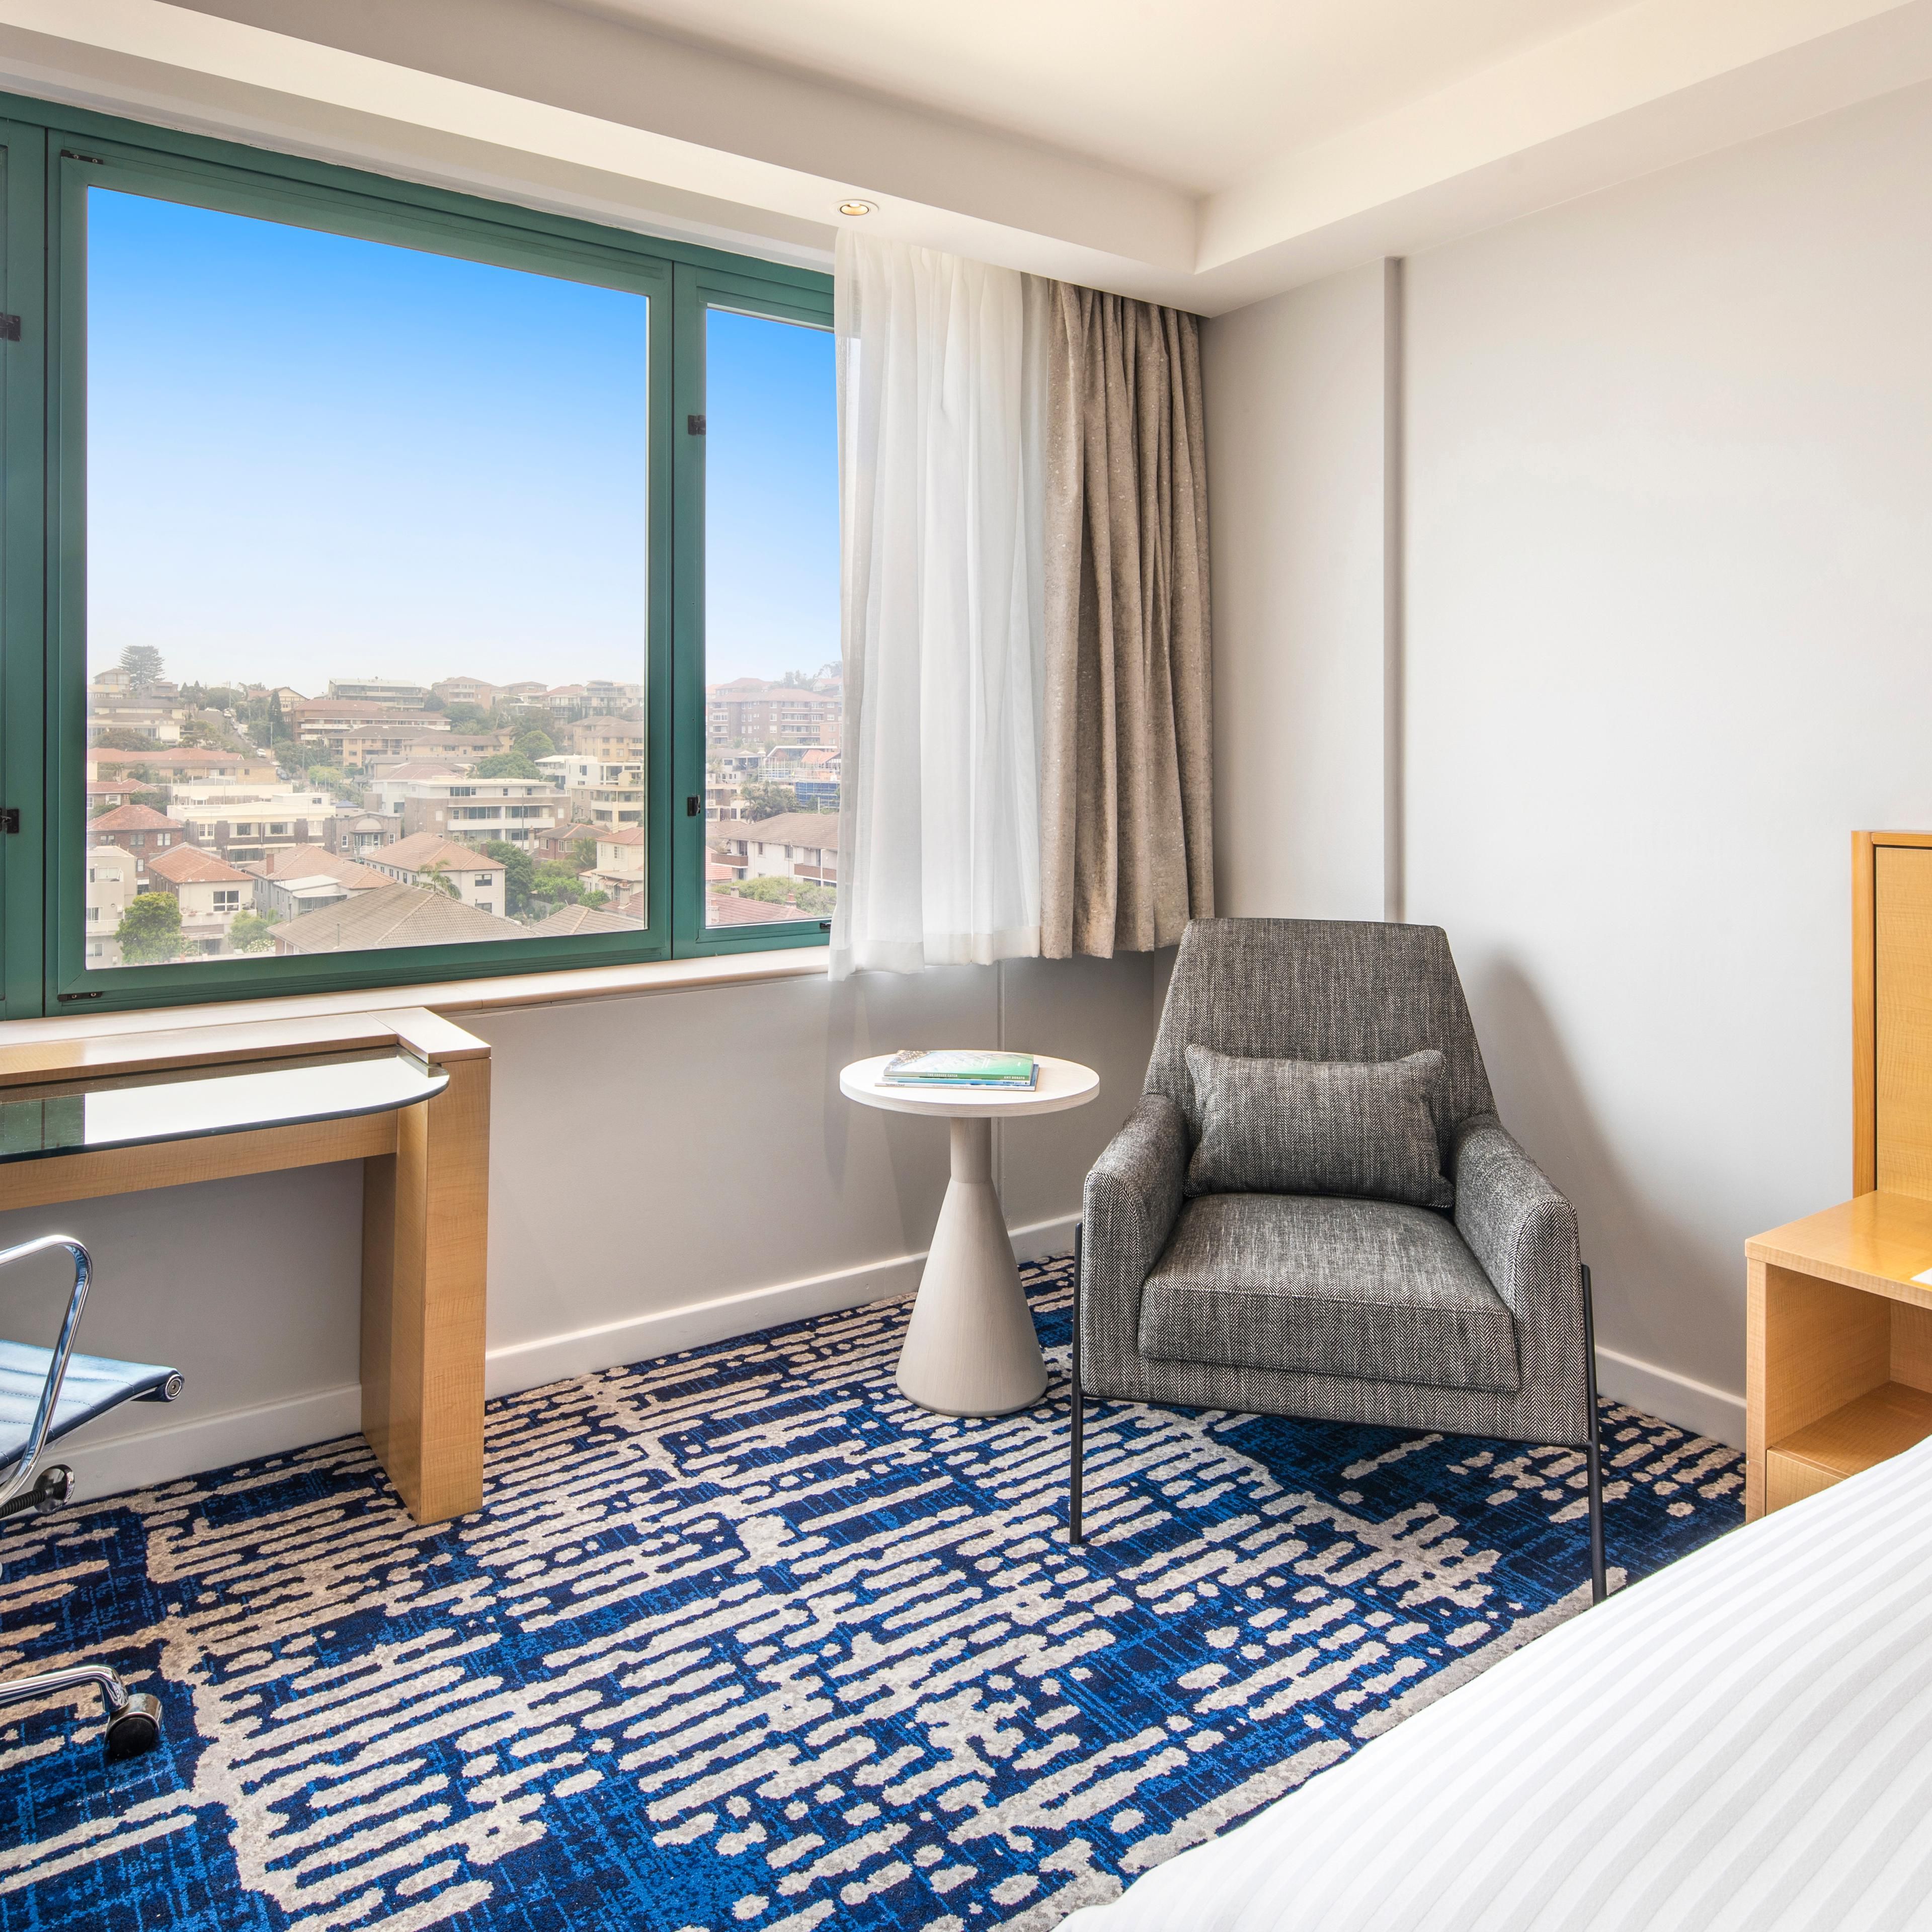 Guest Room with district views over Coogee Village